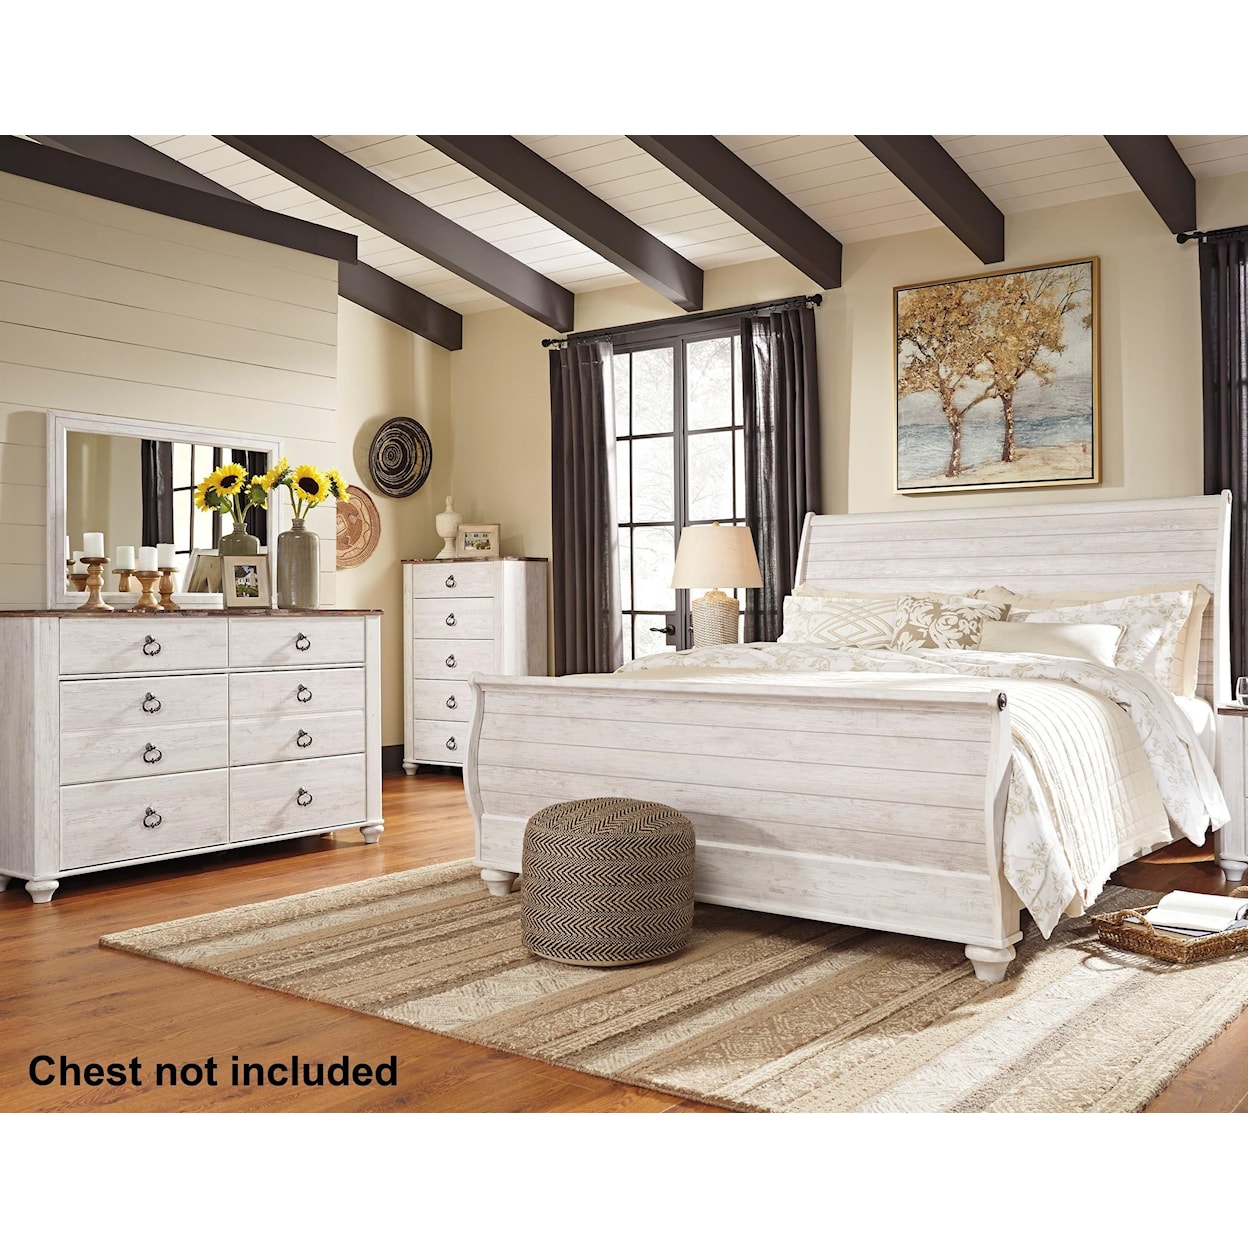 Benchcraft Willowton King Bedroom Group